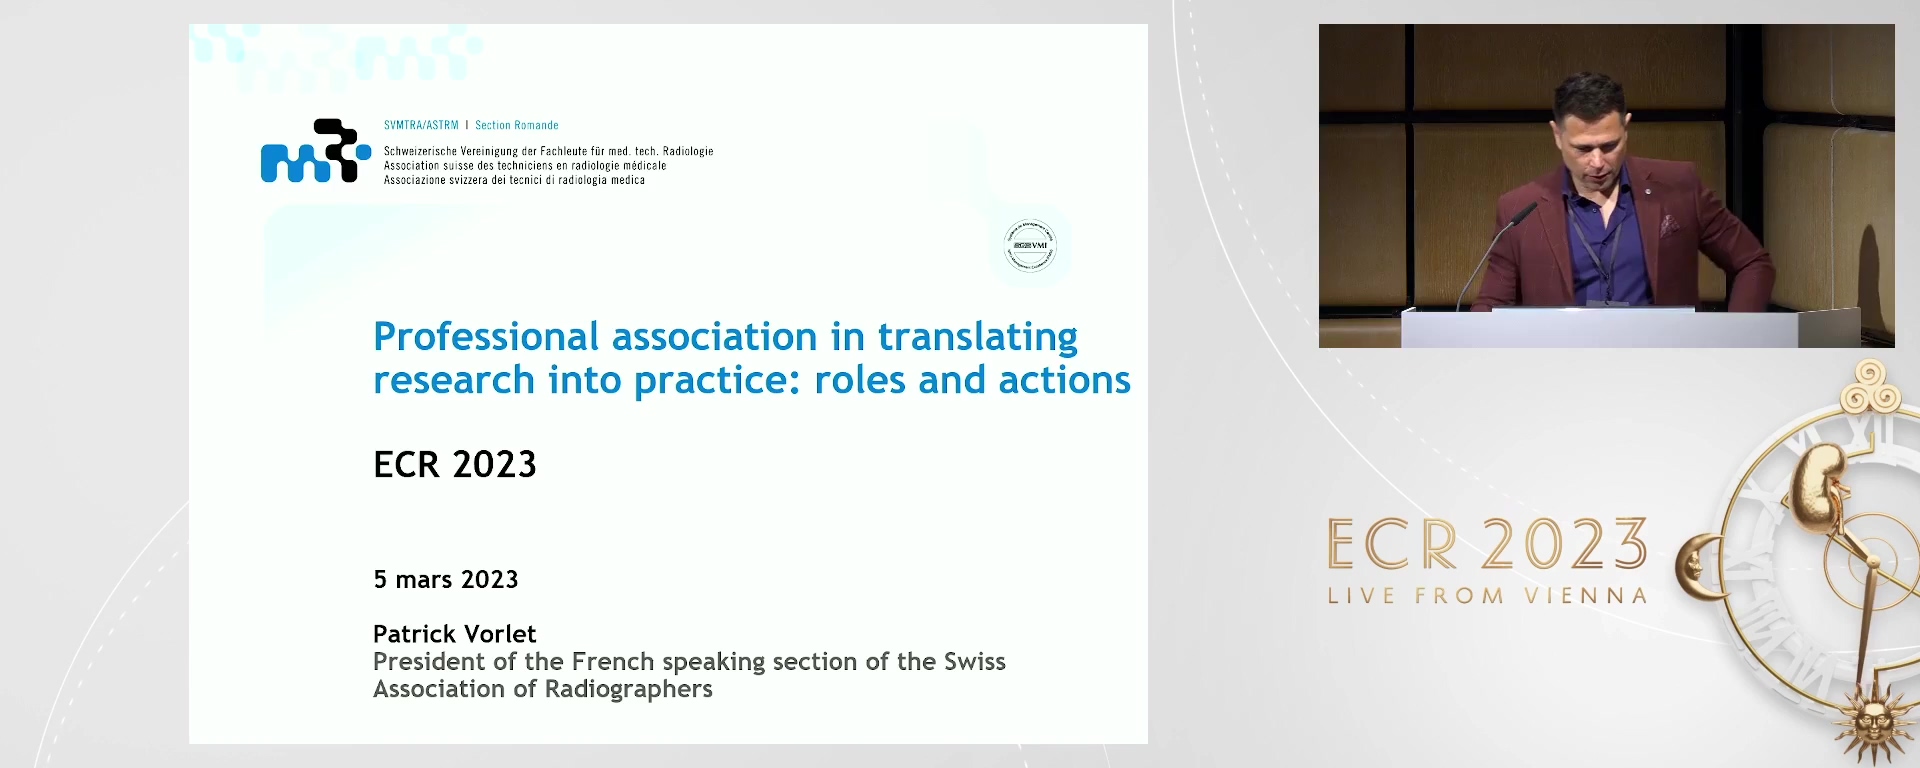 The role of professional associations in translating research into practice